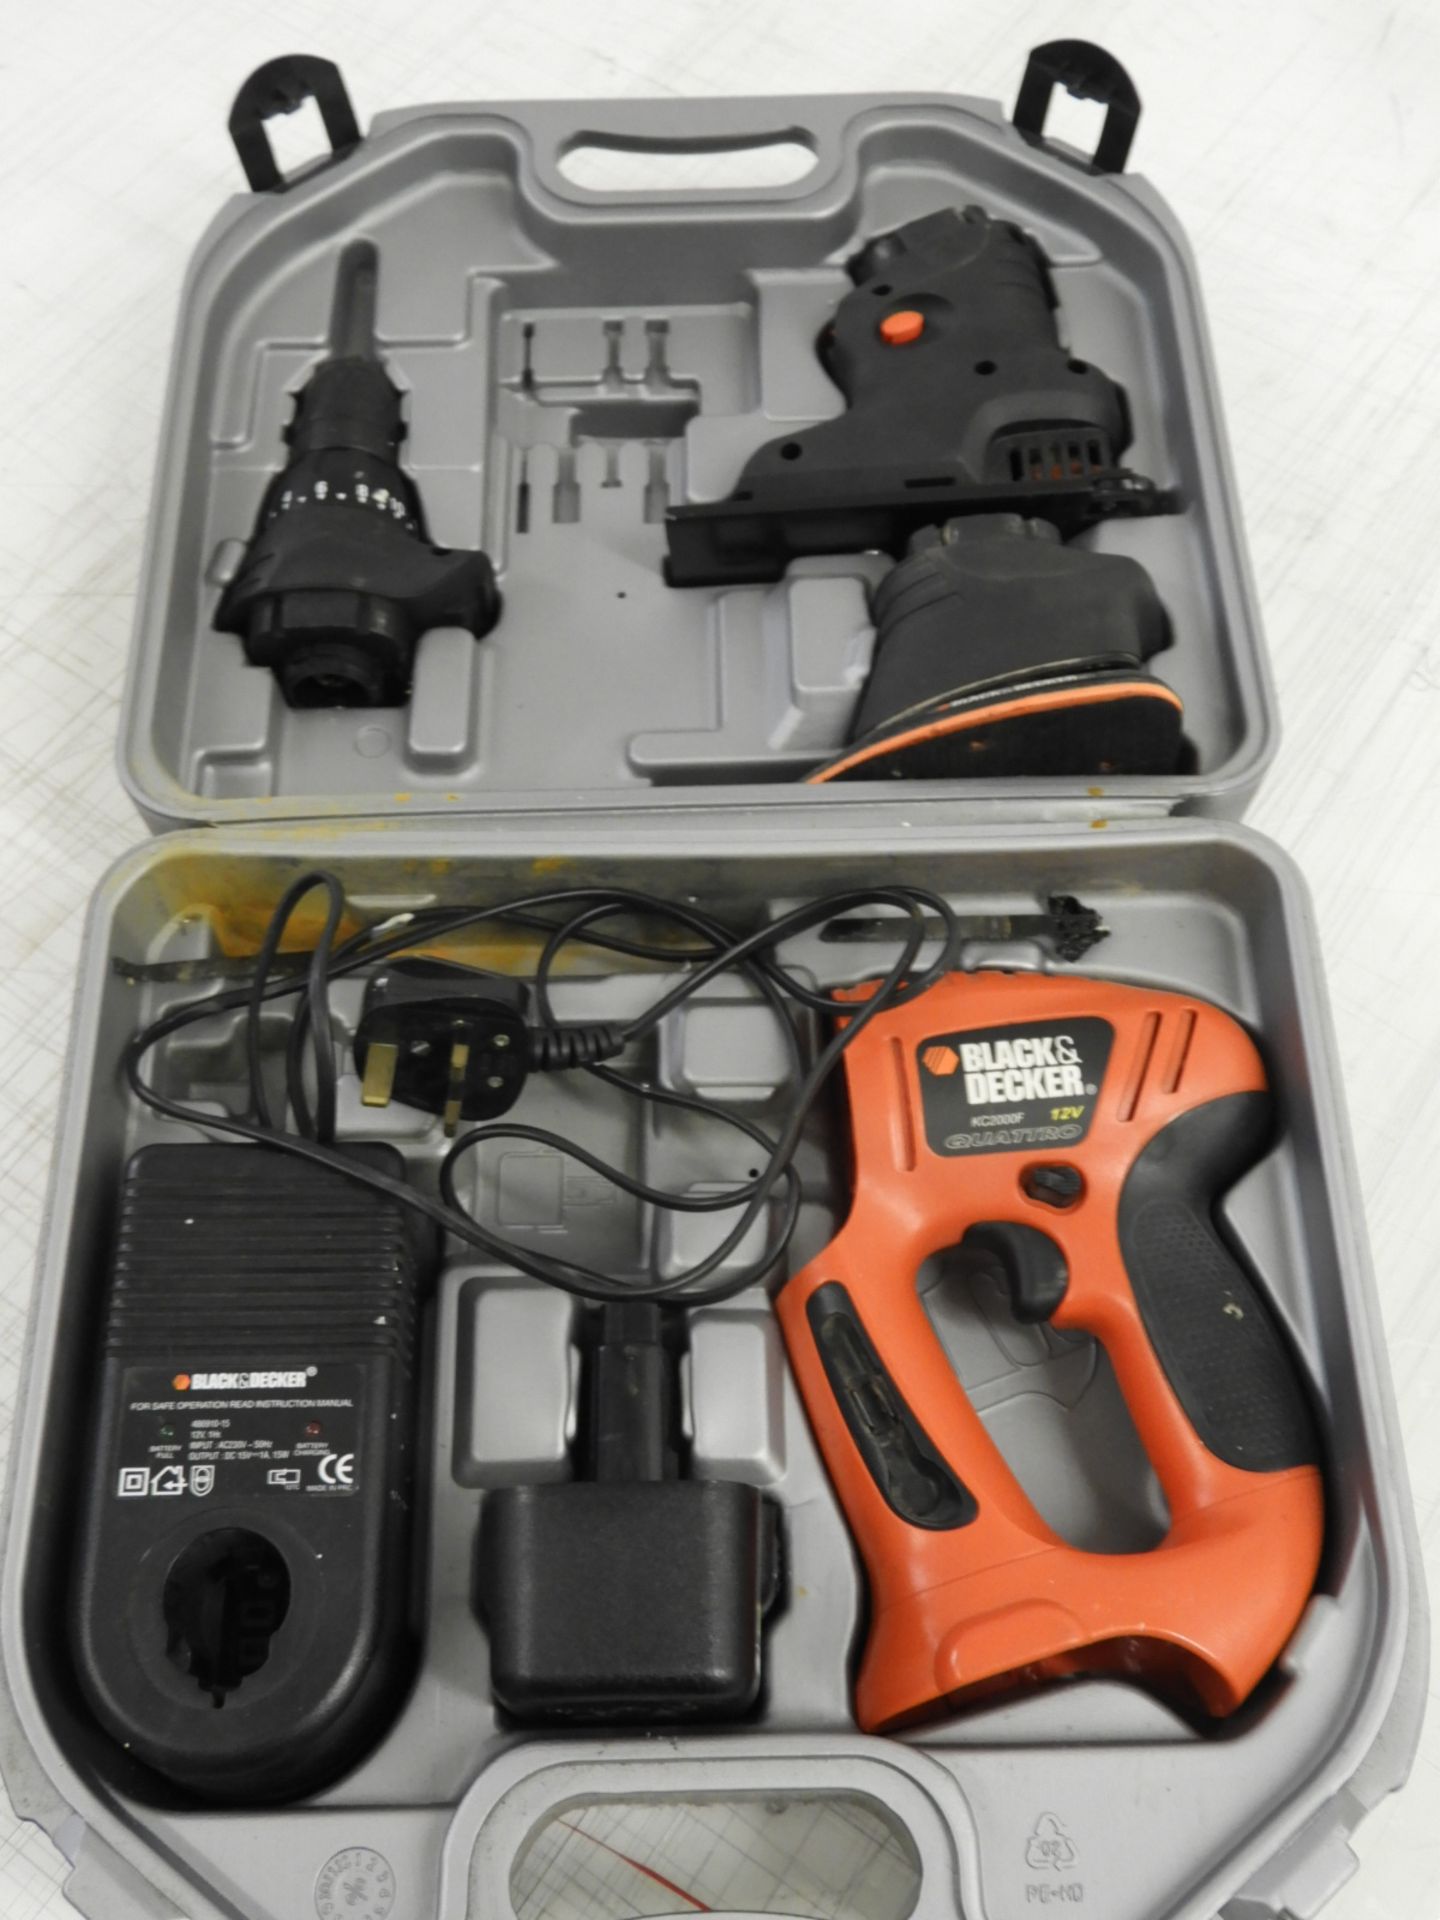 Black & Decker Cordless Tool Set with Sander, Jig Saw and Drill Attachments